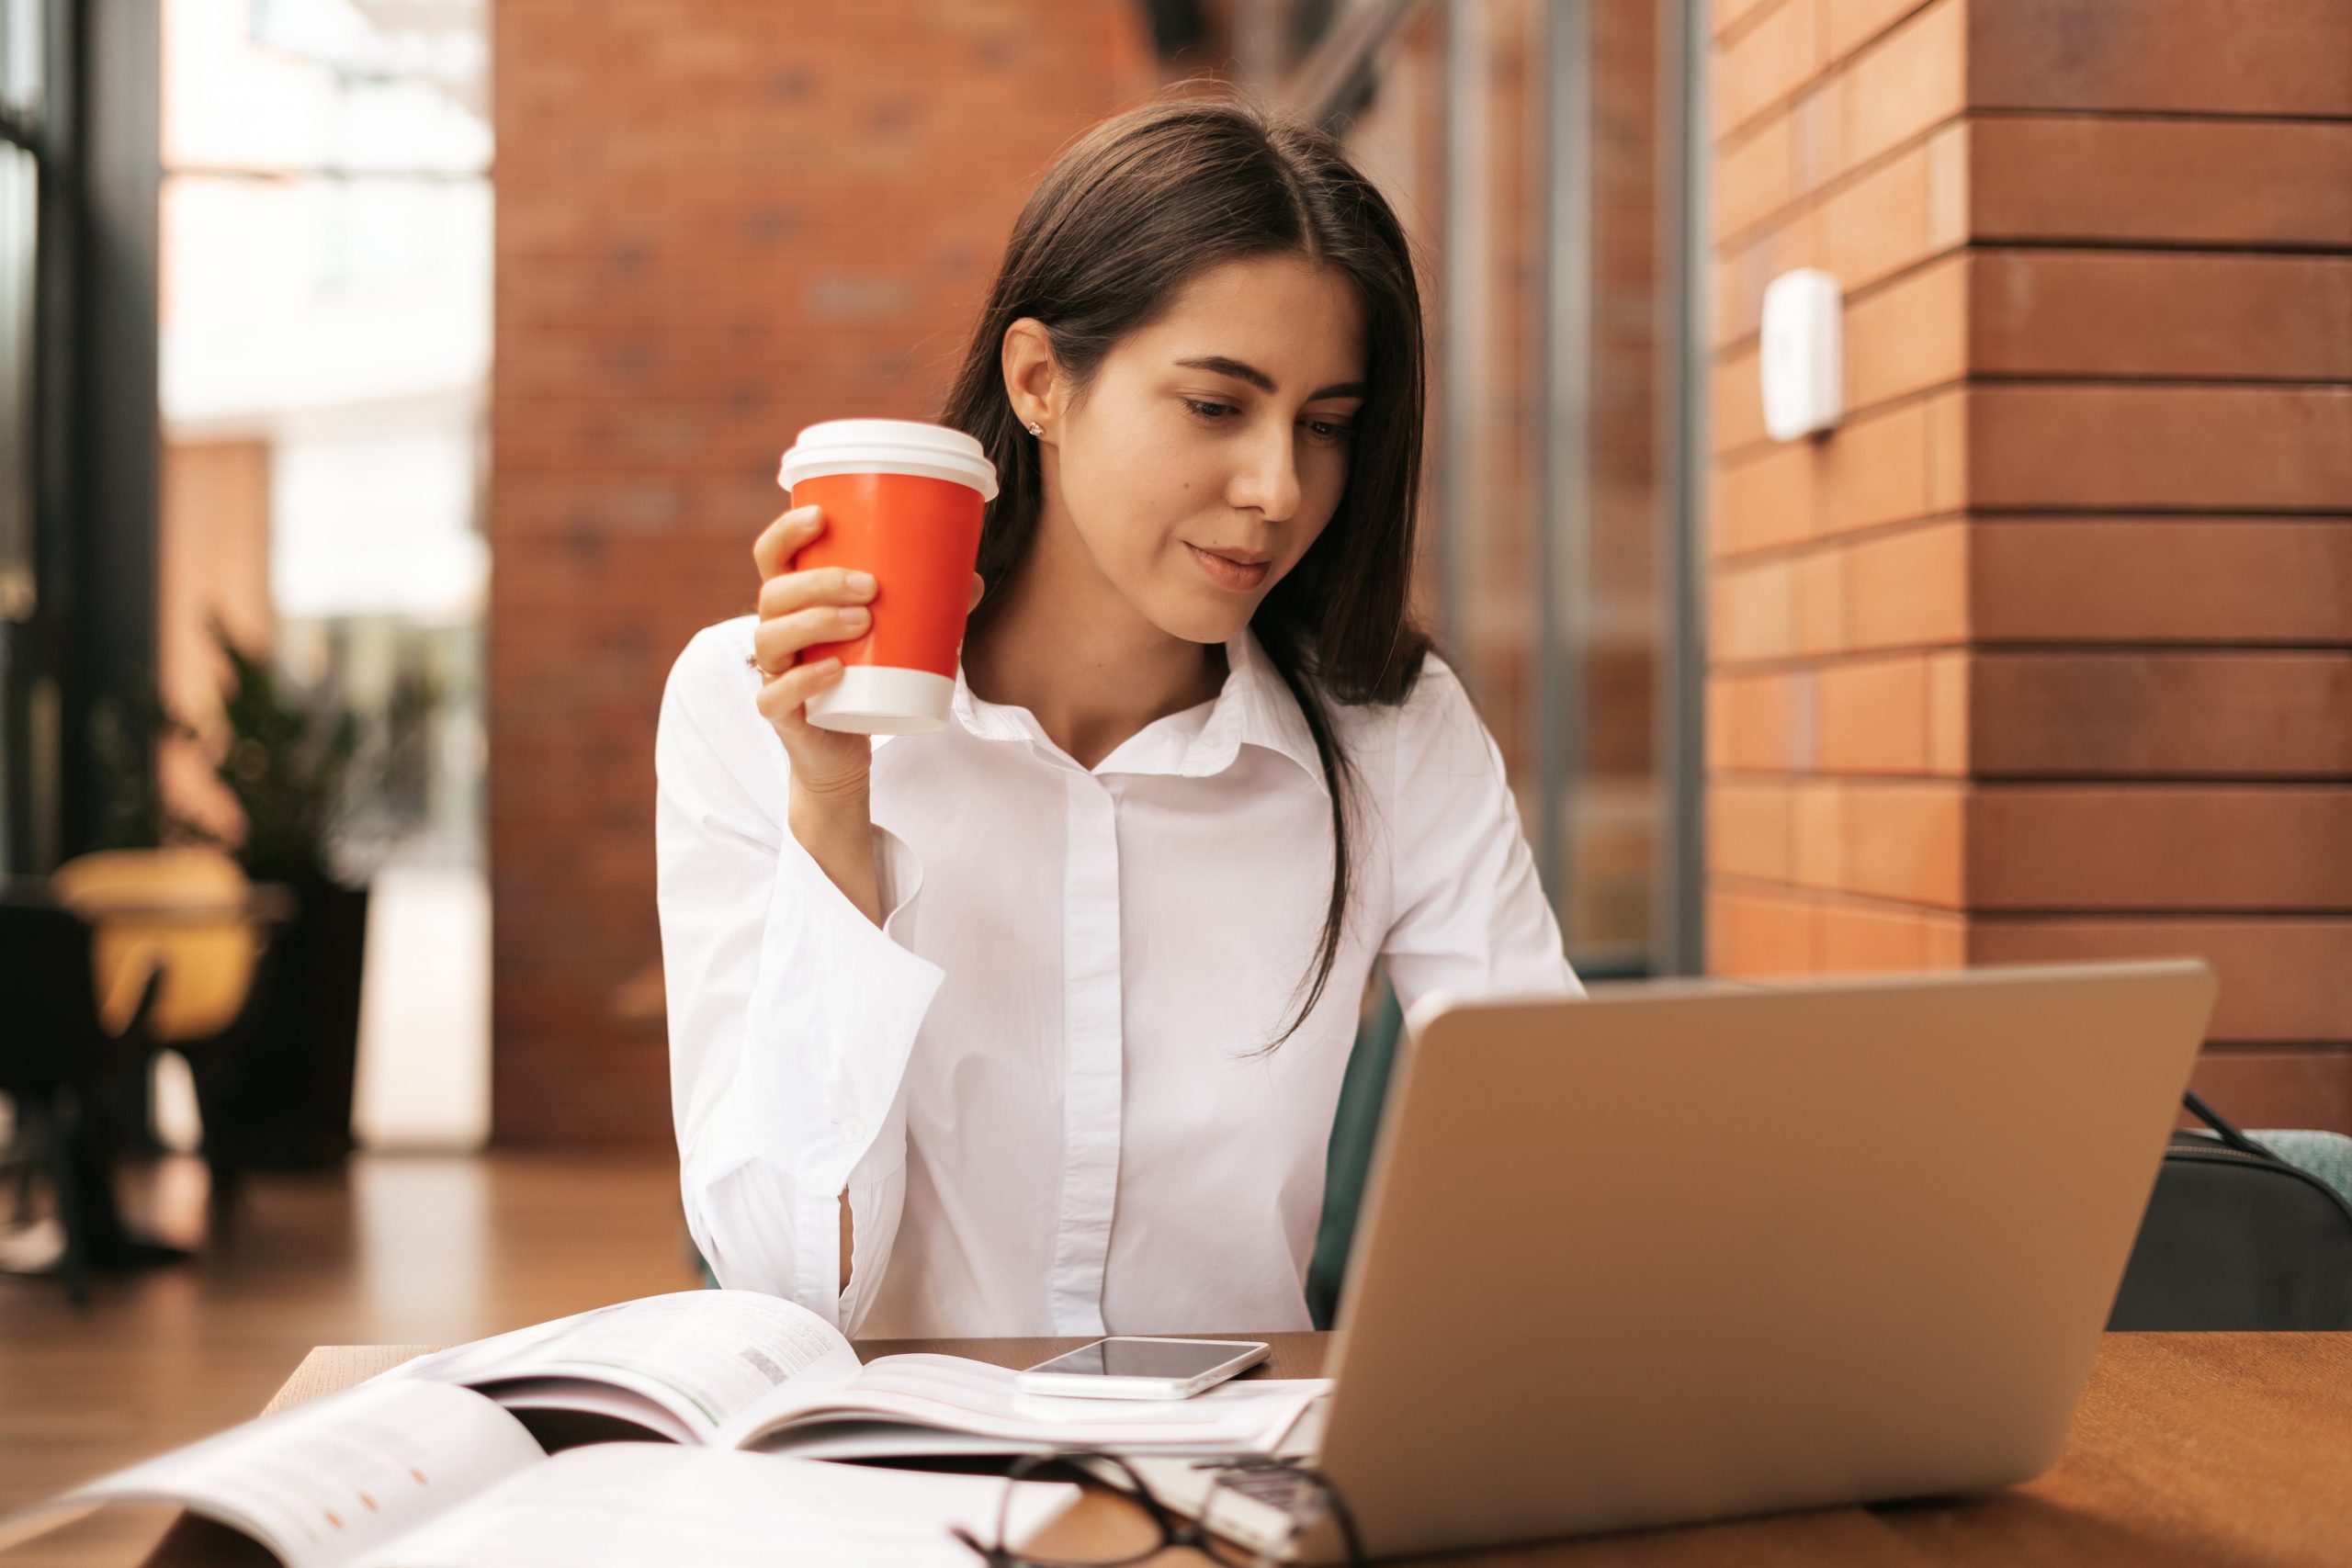 brunette-woman-drinking-coffee-to-go-while-working-2022-01-18-23-32-14-utc-min